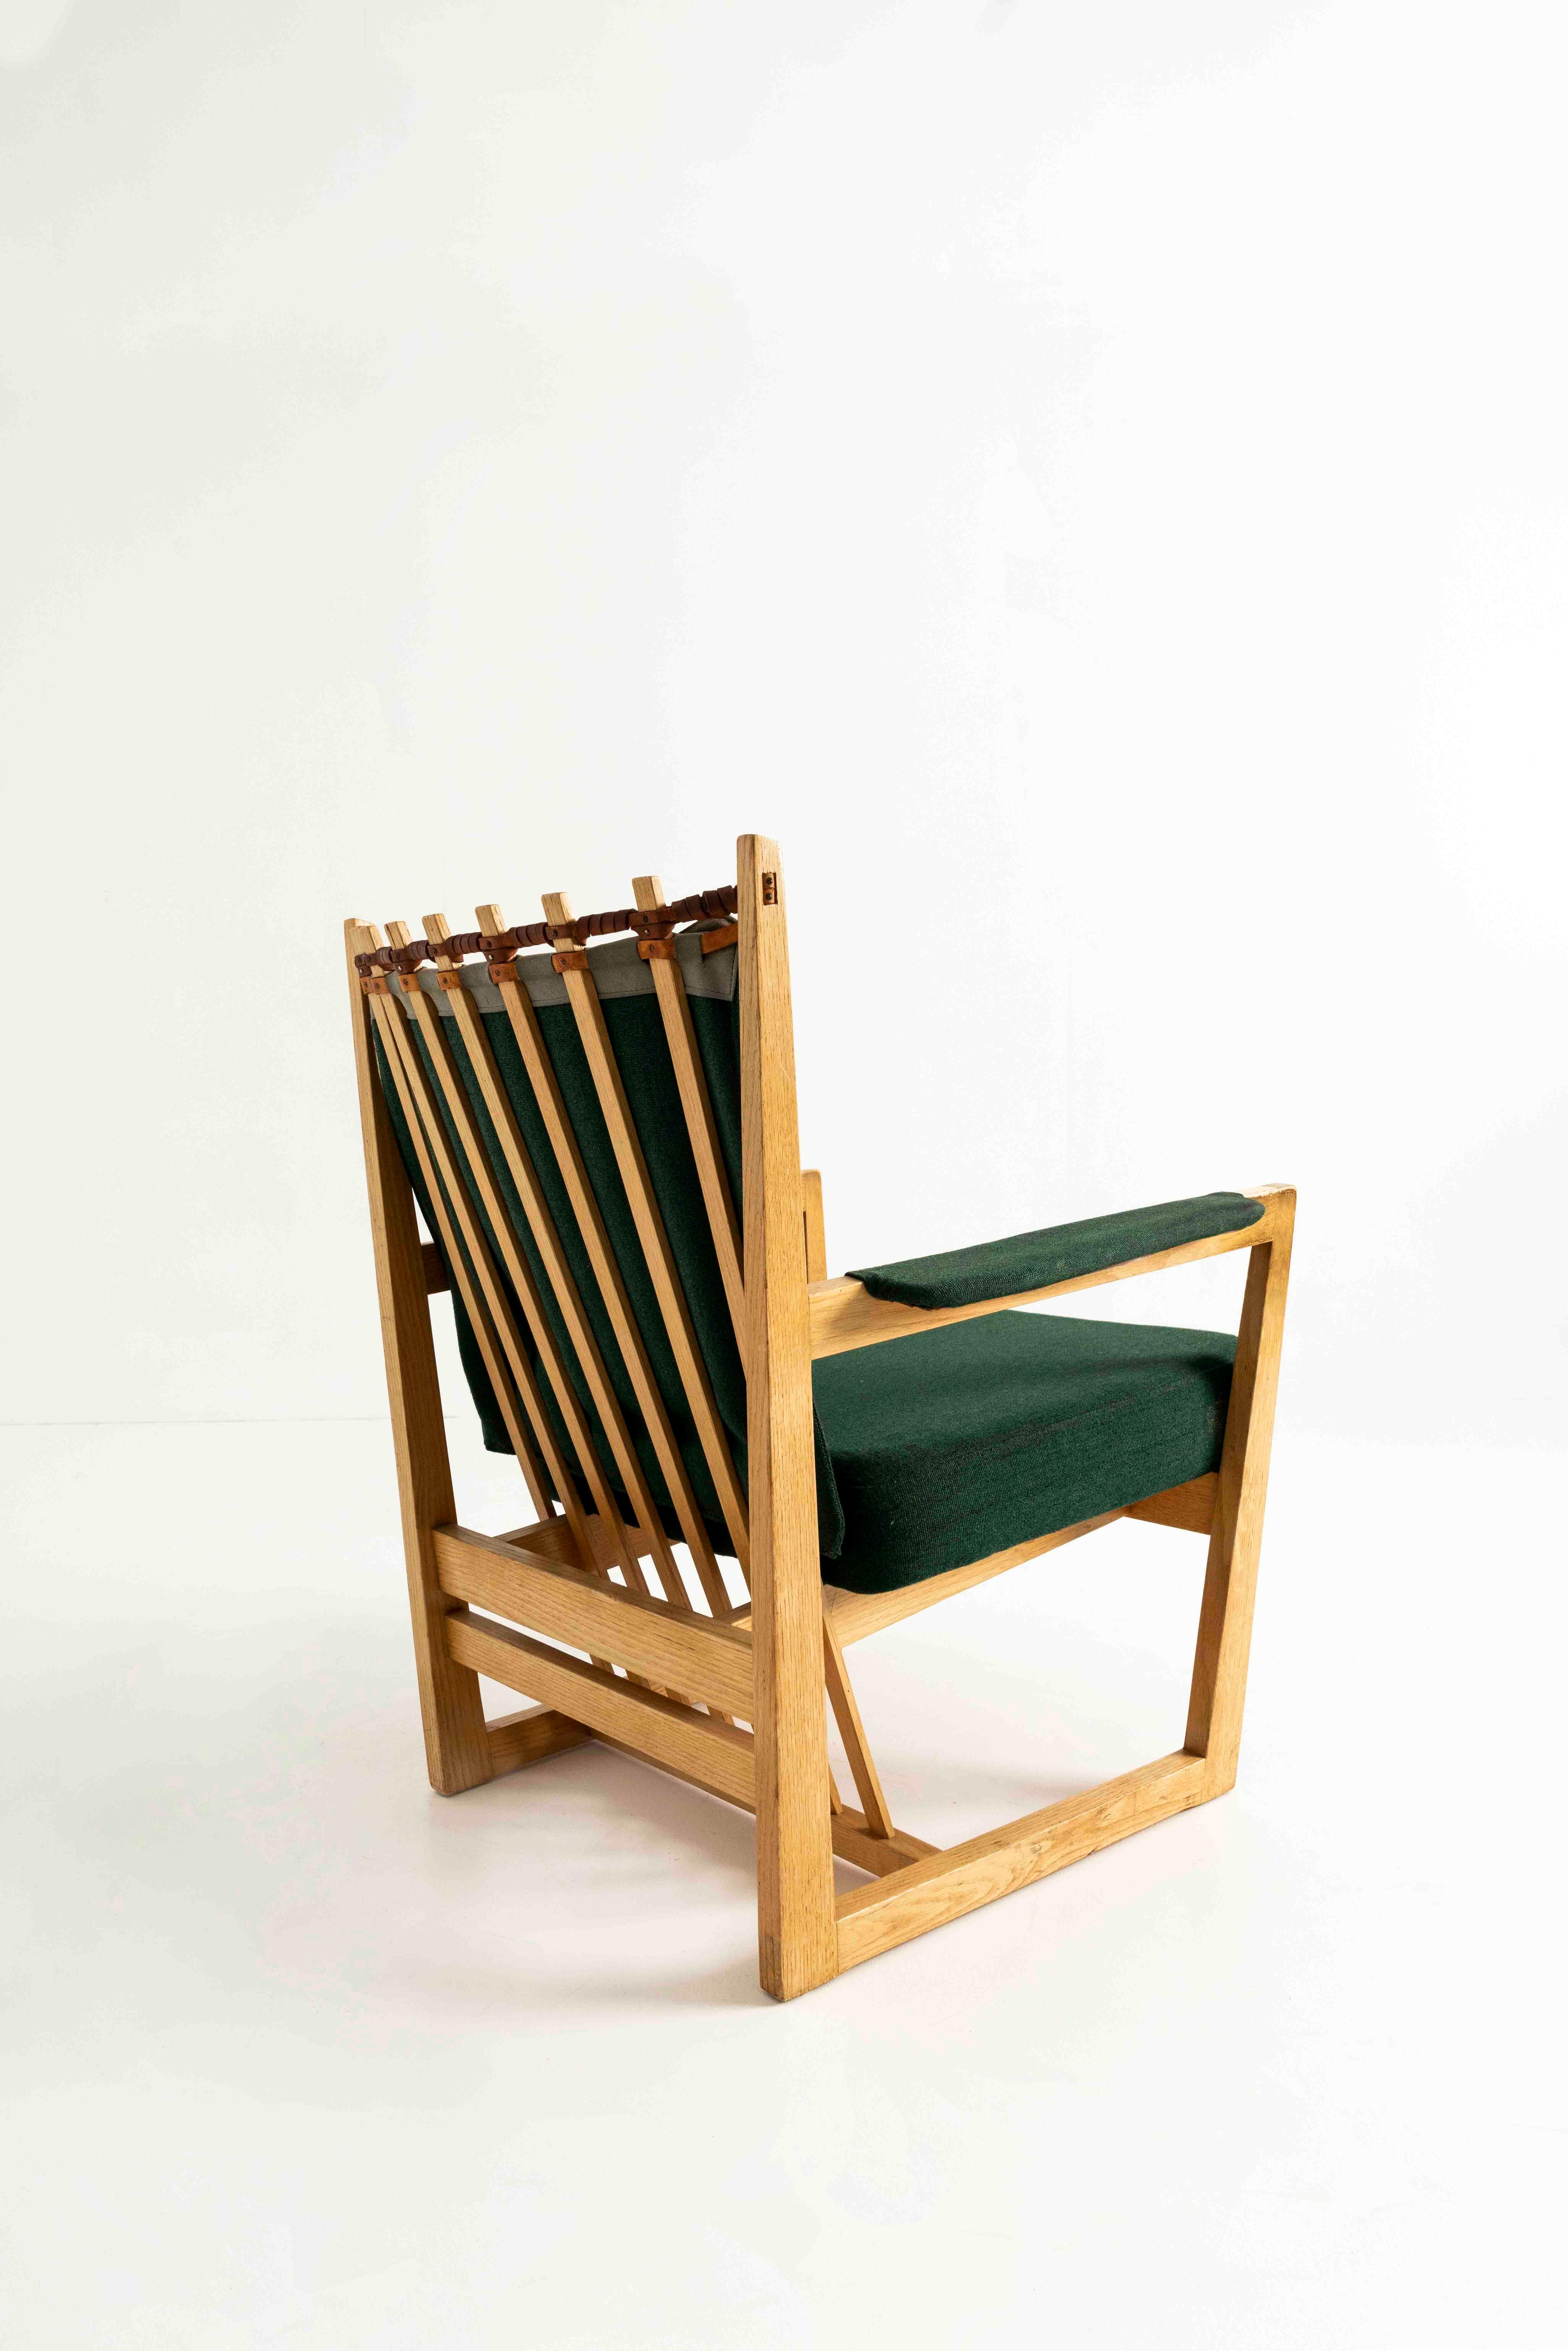 Rare Prototype Easy chair by Albert Haberer from the 1950s, Germany. Only three of them were made, and the chair comes from the previous home of Albert Haberer. In the end, this chair never got into production. You can see the handmade nature of